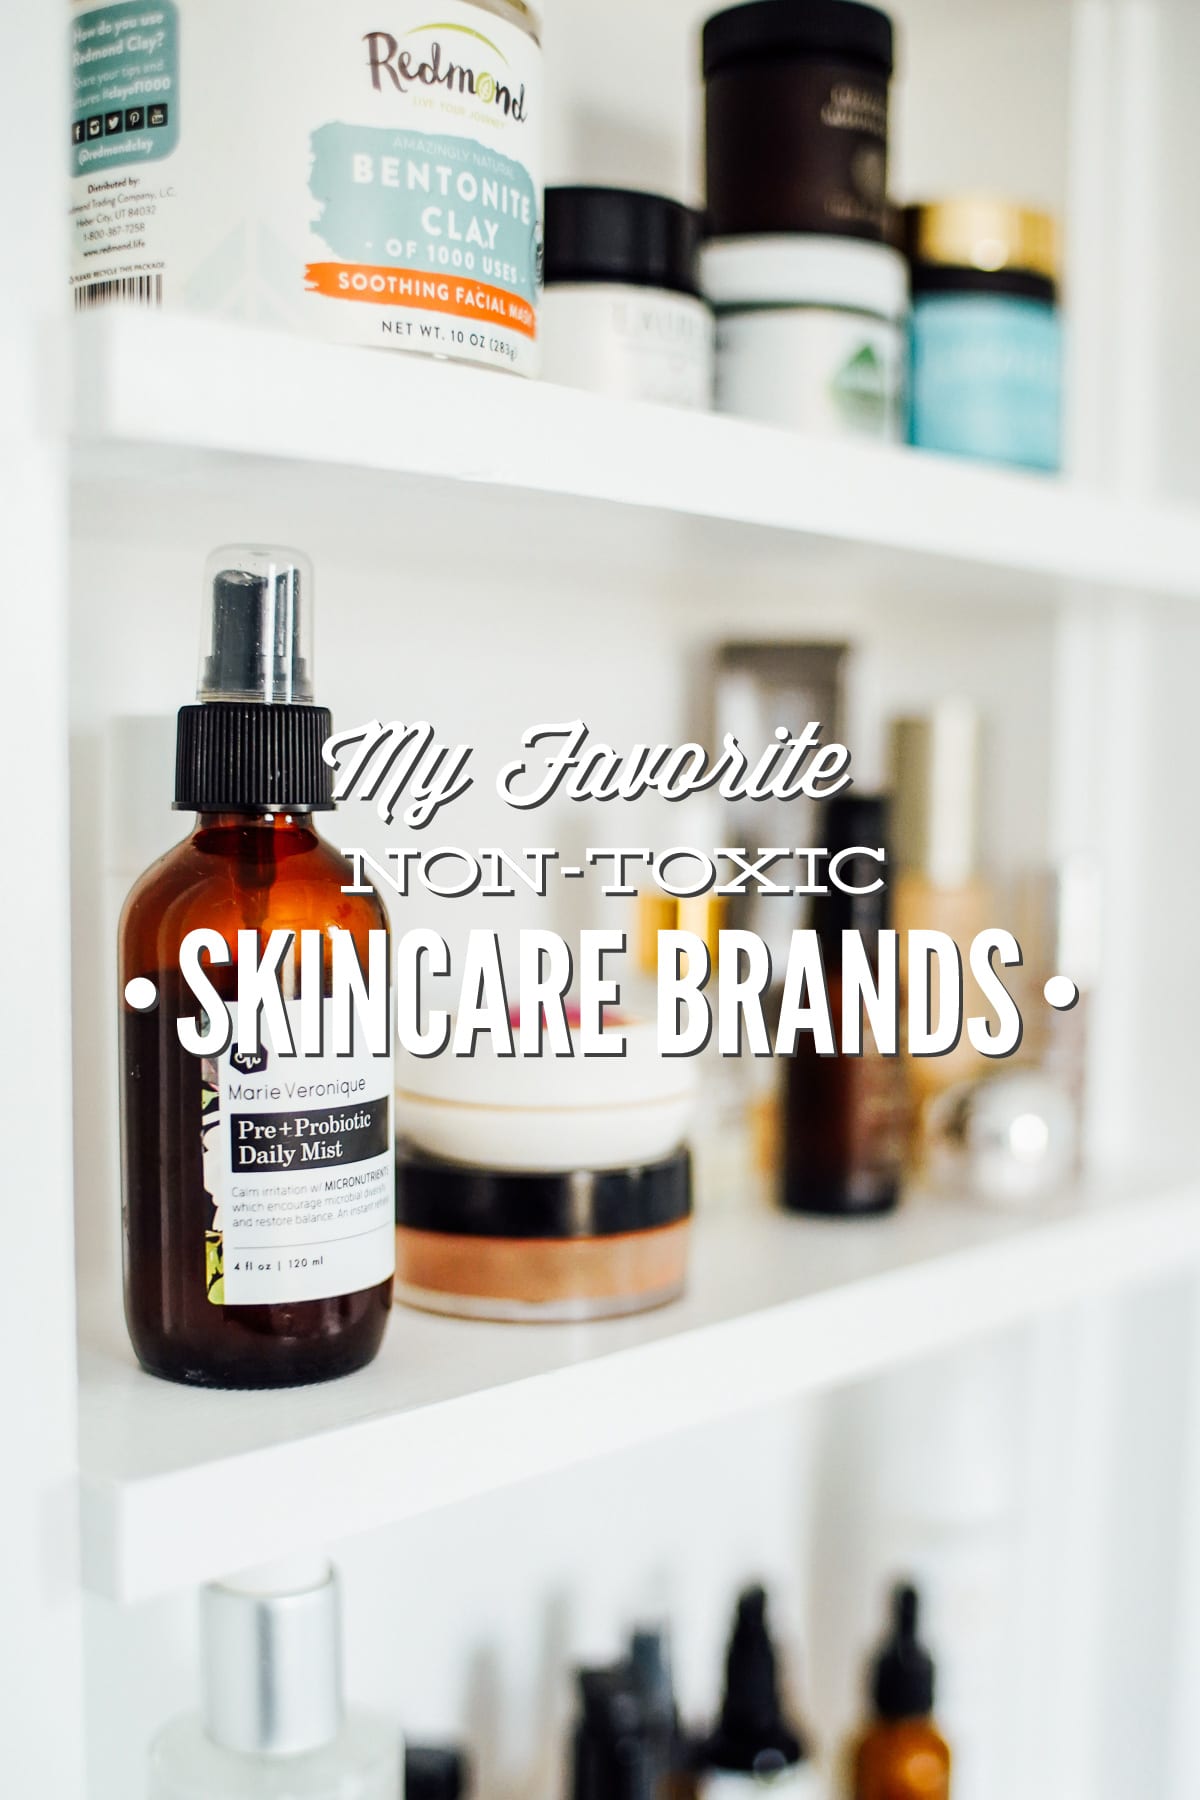 The Best Non-Toxic Skincare Brands